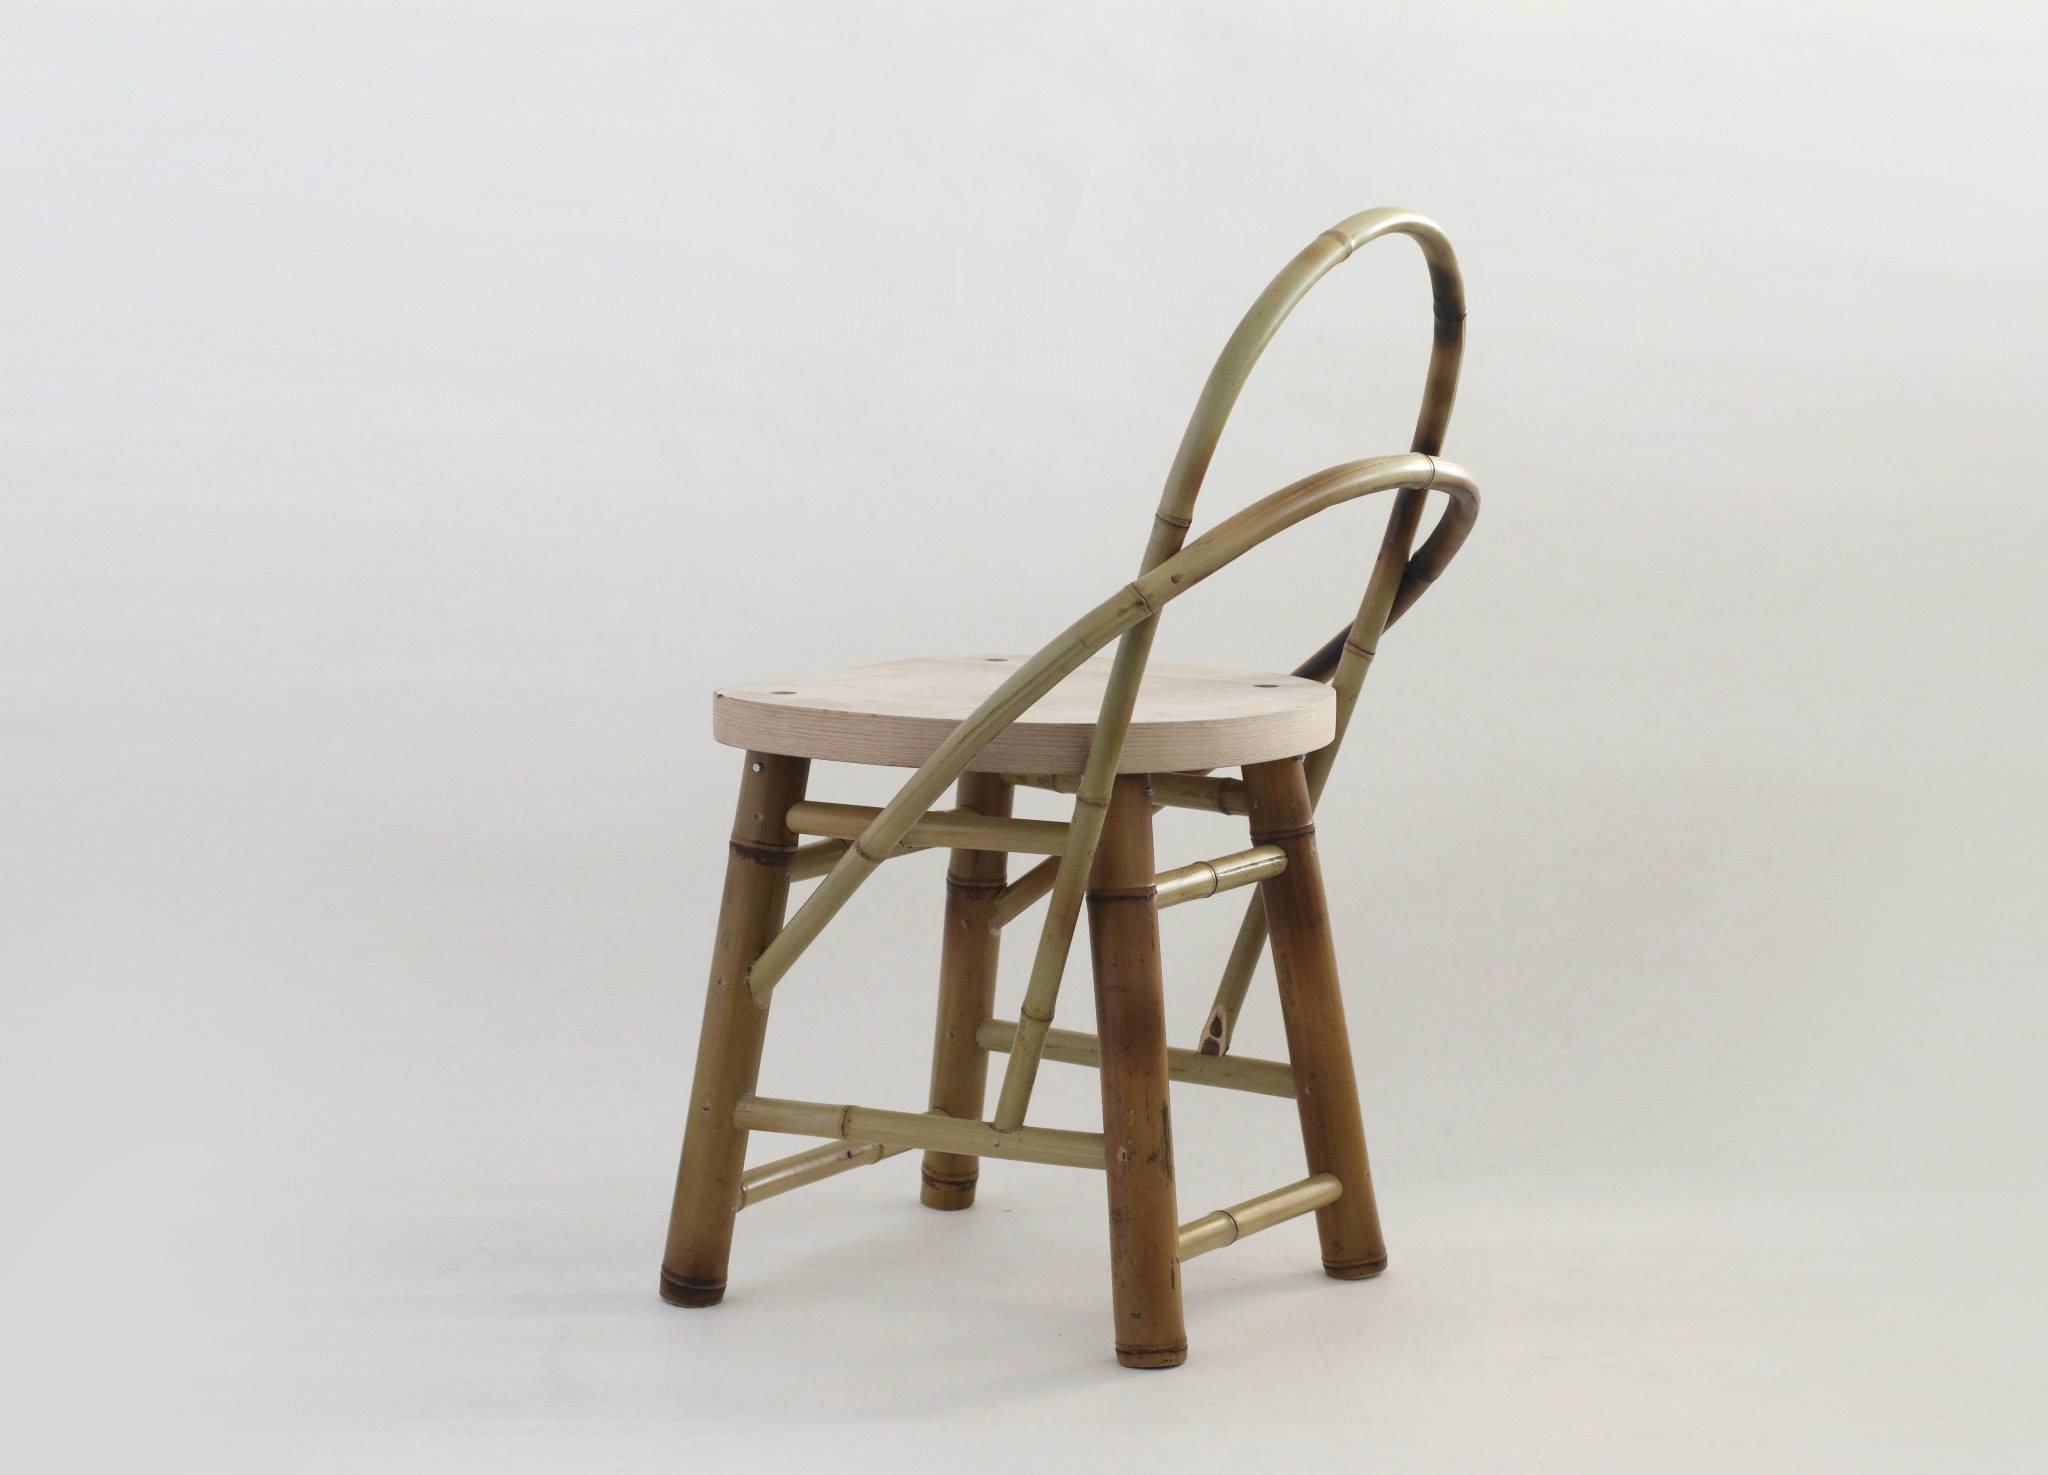 Bamboo Chair by Milk Design